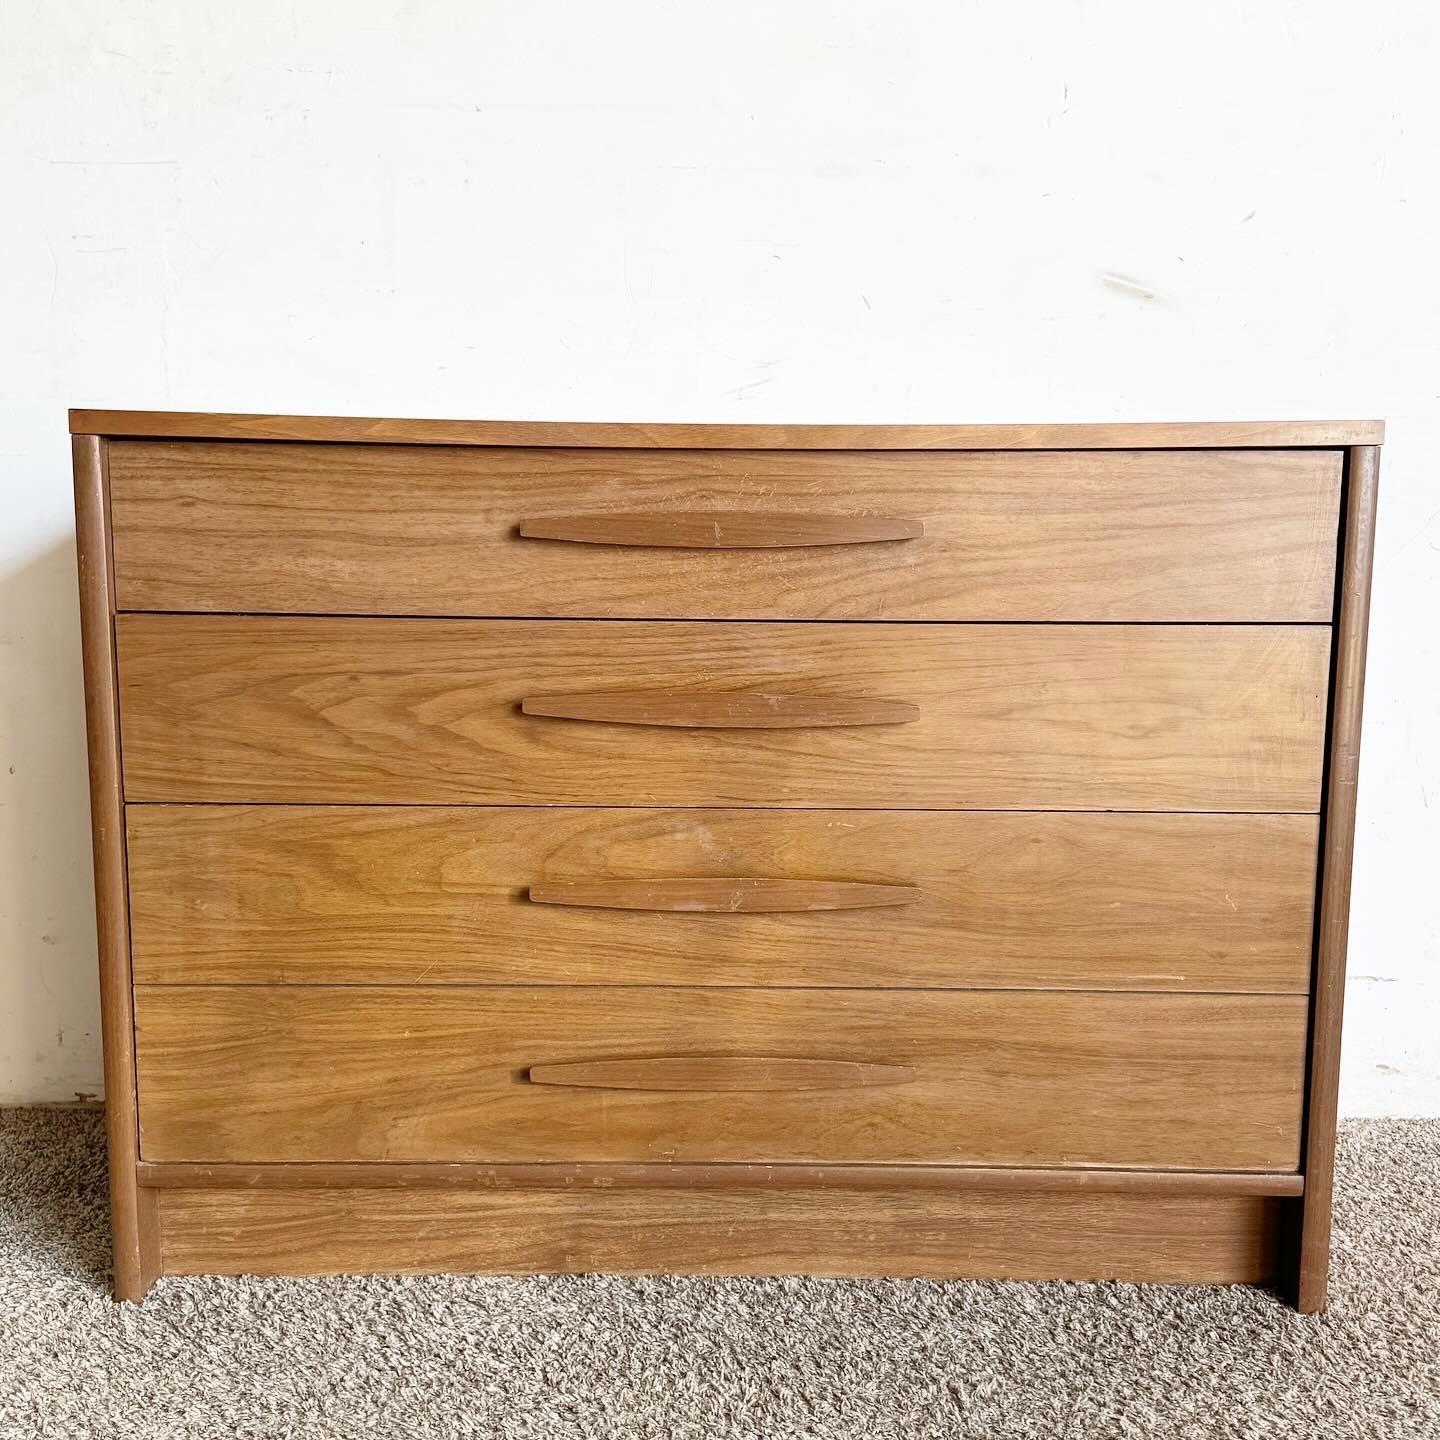 Discover the charm of the Mid Century Modern Chest of Drawers by Kroehler, a perfect blend of style and functionality. With its classic clean lines and minimalist aesthetic, this chest is a testament to mid-century modern design. Made from